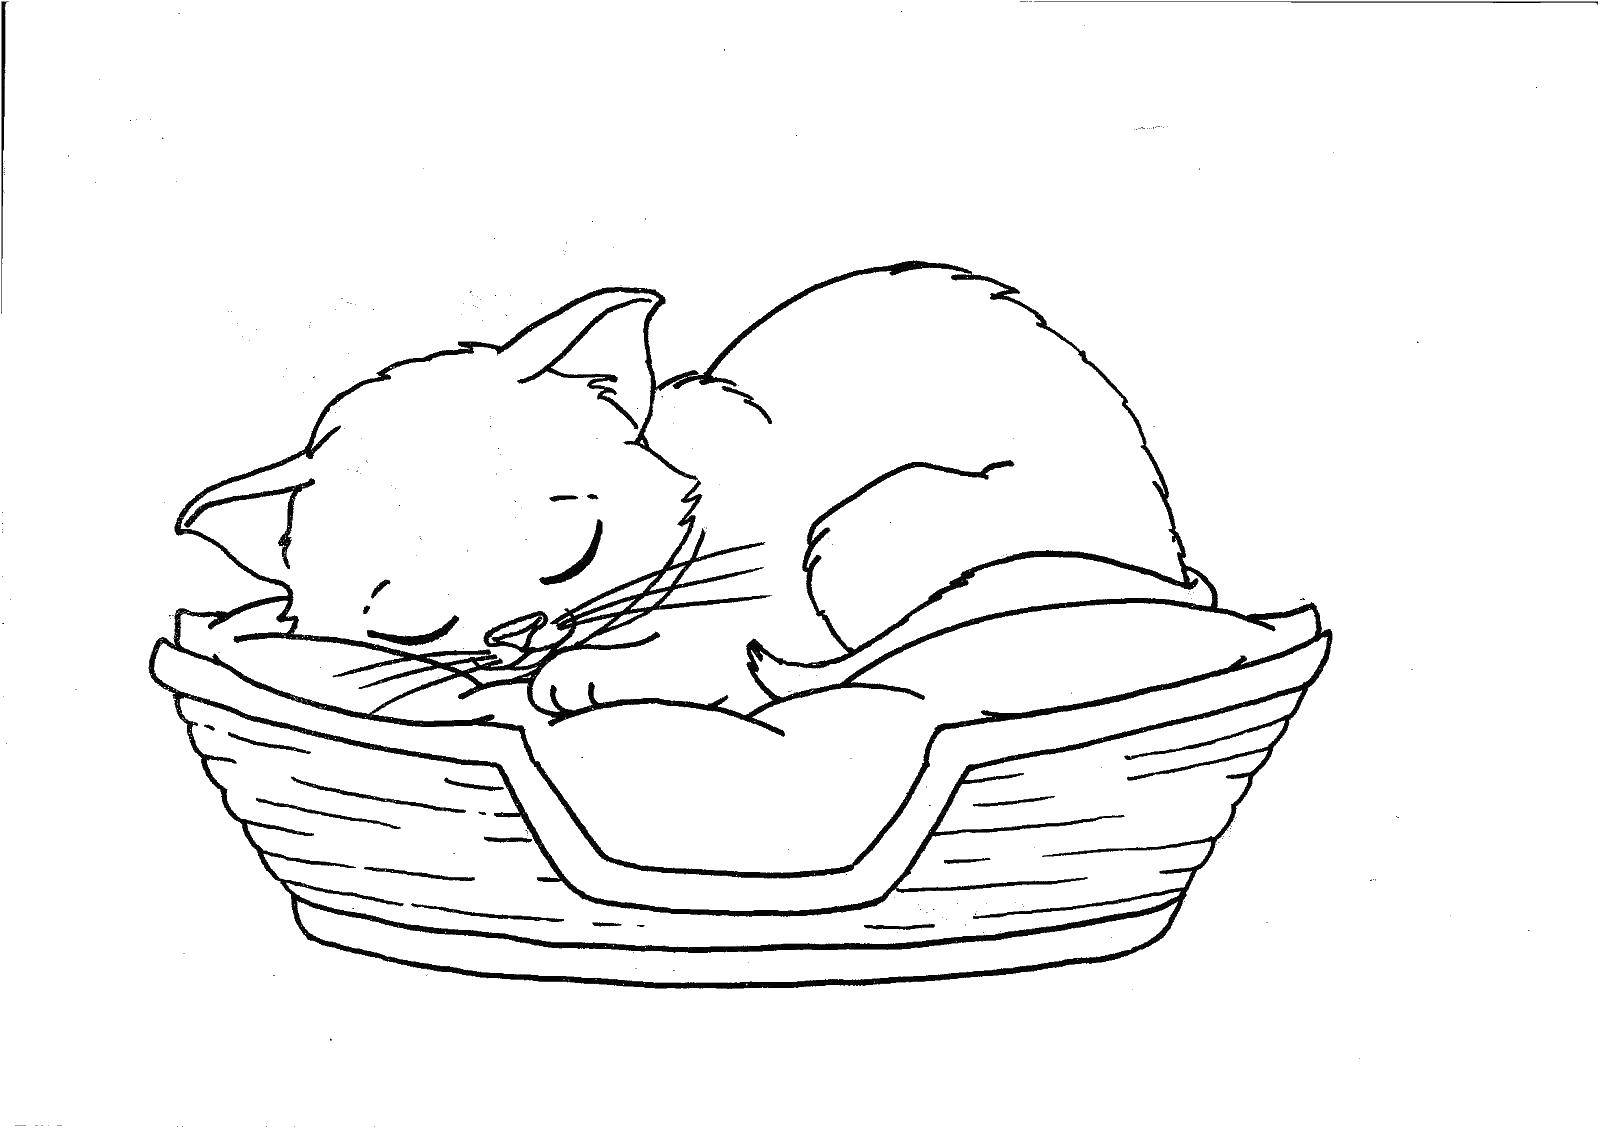 Coloring Sleeping kitten. Category Cats and kittens. Tags:  kitty, cats, kitties, animals.